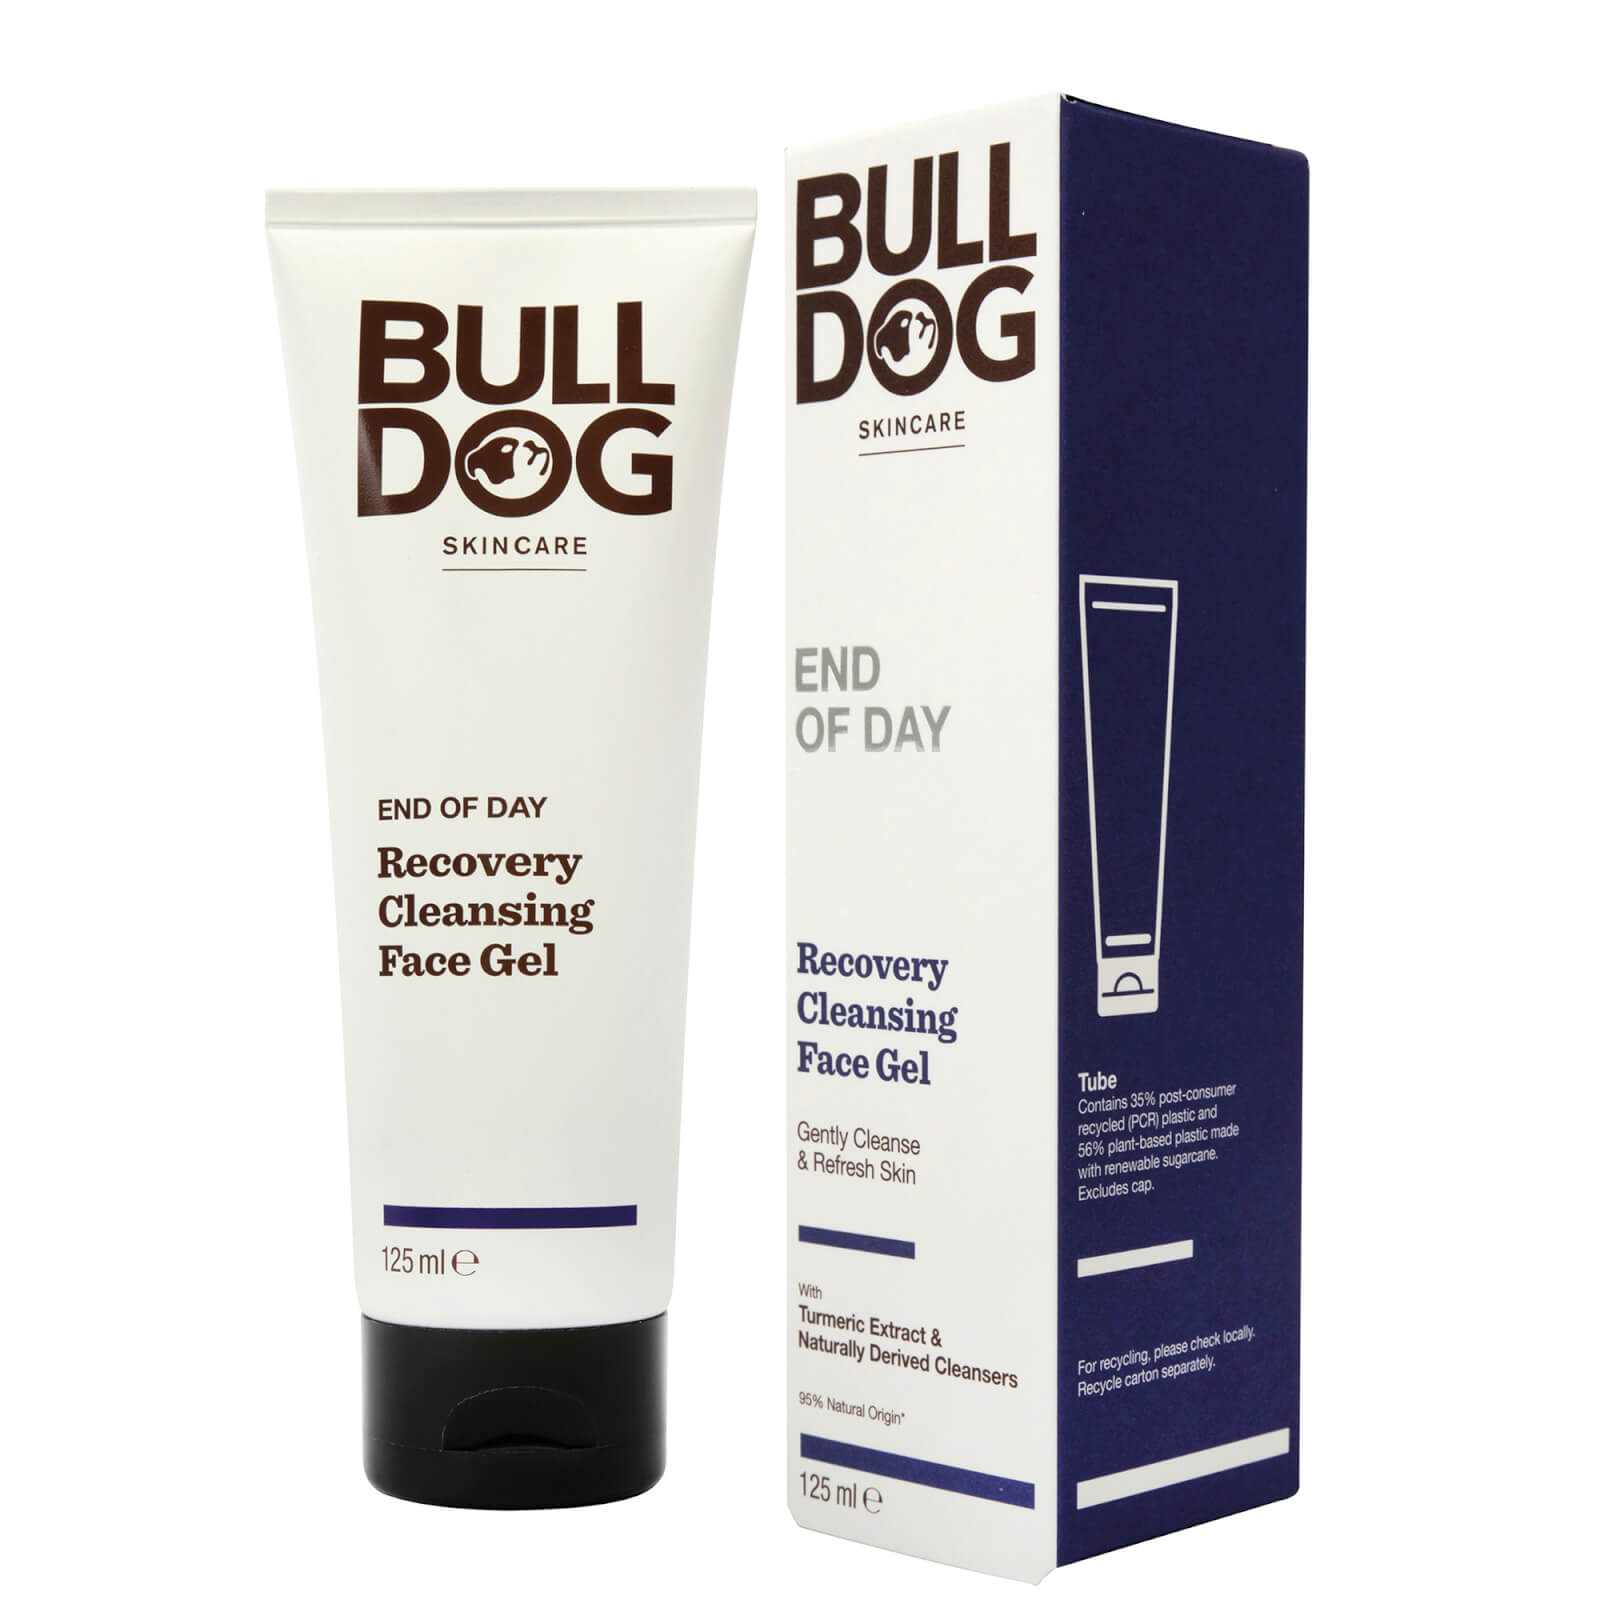 Photos - Facial / Body Cleansing Product Bulldog Skincare Bulldog End of Day Recovery Cleansing Gel 125ml X302449000 